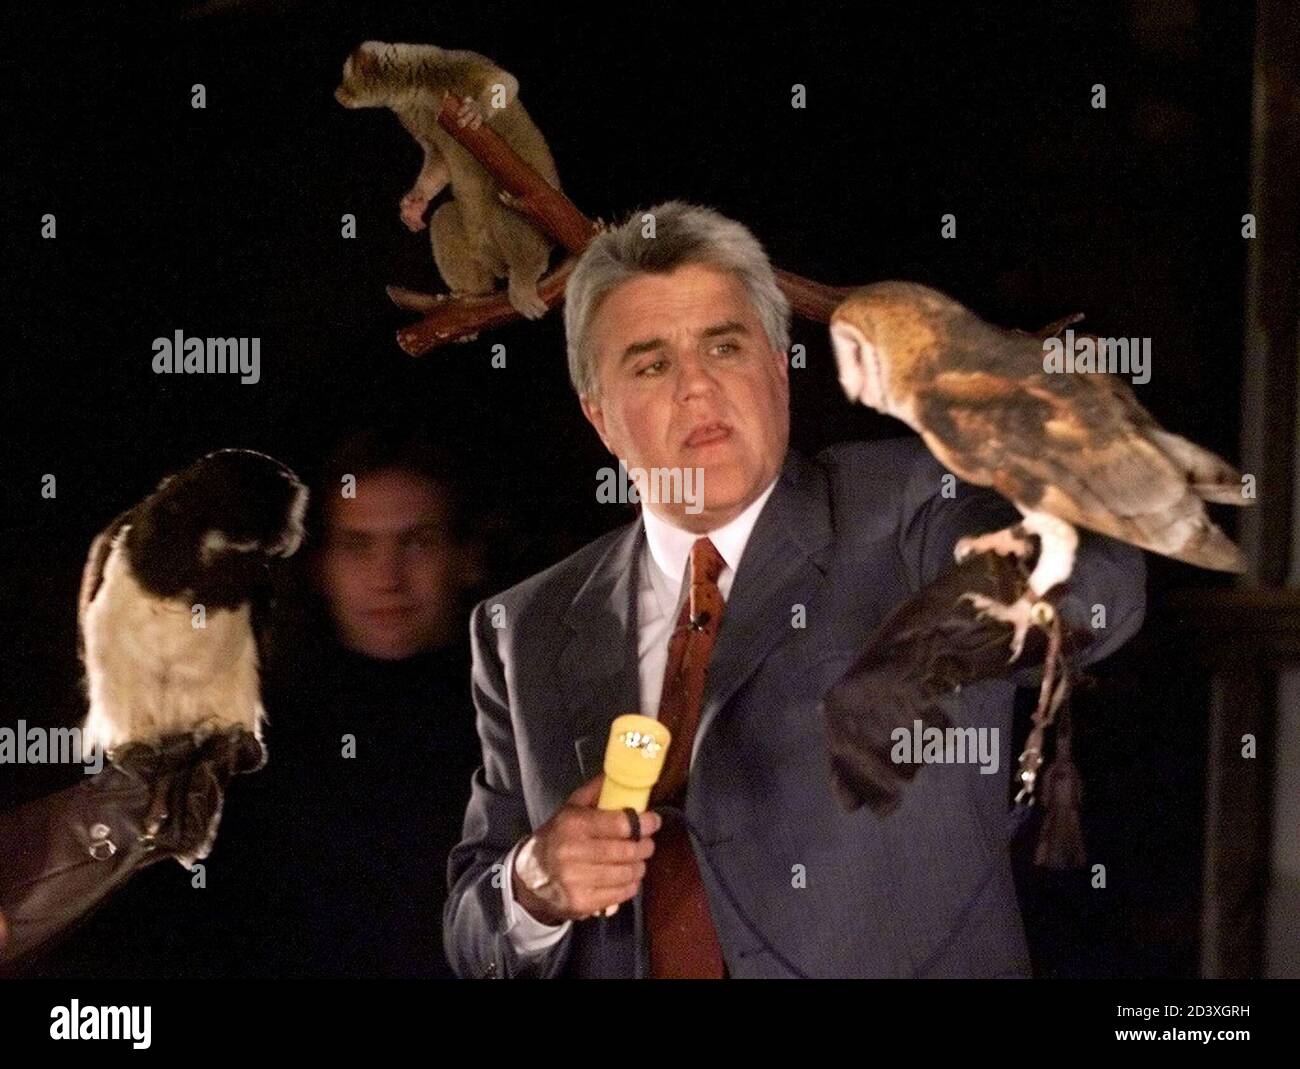 Talk show host Jay Leno shines a flashlight on nocturnal animals, including a pair of owls during a special taping of "The Tonight Show with Jay Leno "Unplugged" at NBC studios in Burbank, California June 21, 2001. The show was lit without normal studio lighting in tribute to the California energy crisis. Audience members held flashlights on Leno and his guests to provide illumination for the show.  FSP/SV Stock Photo